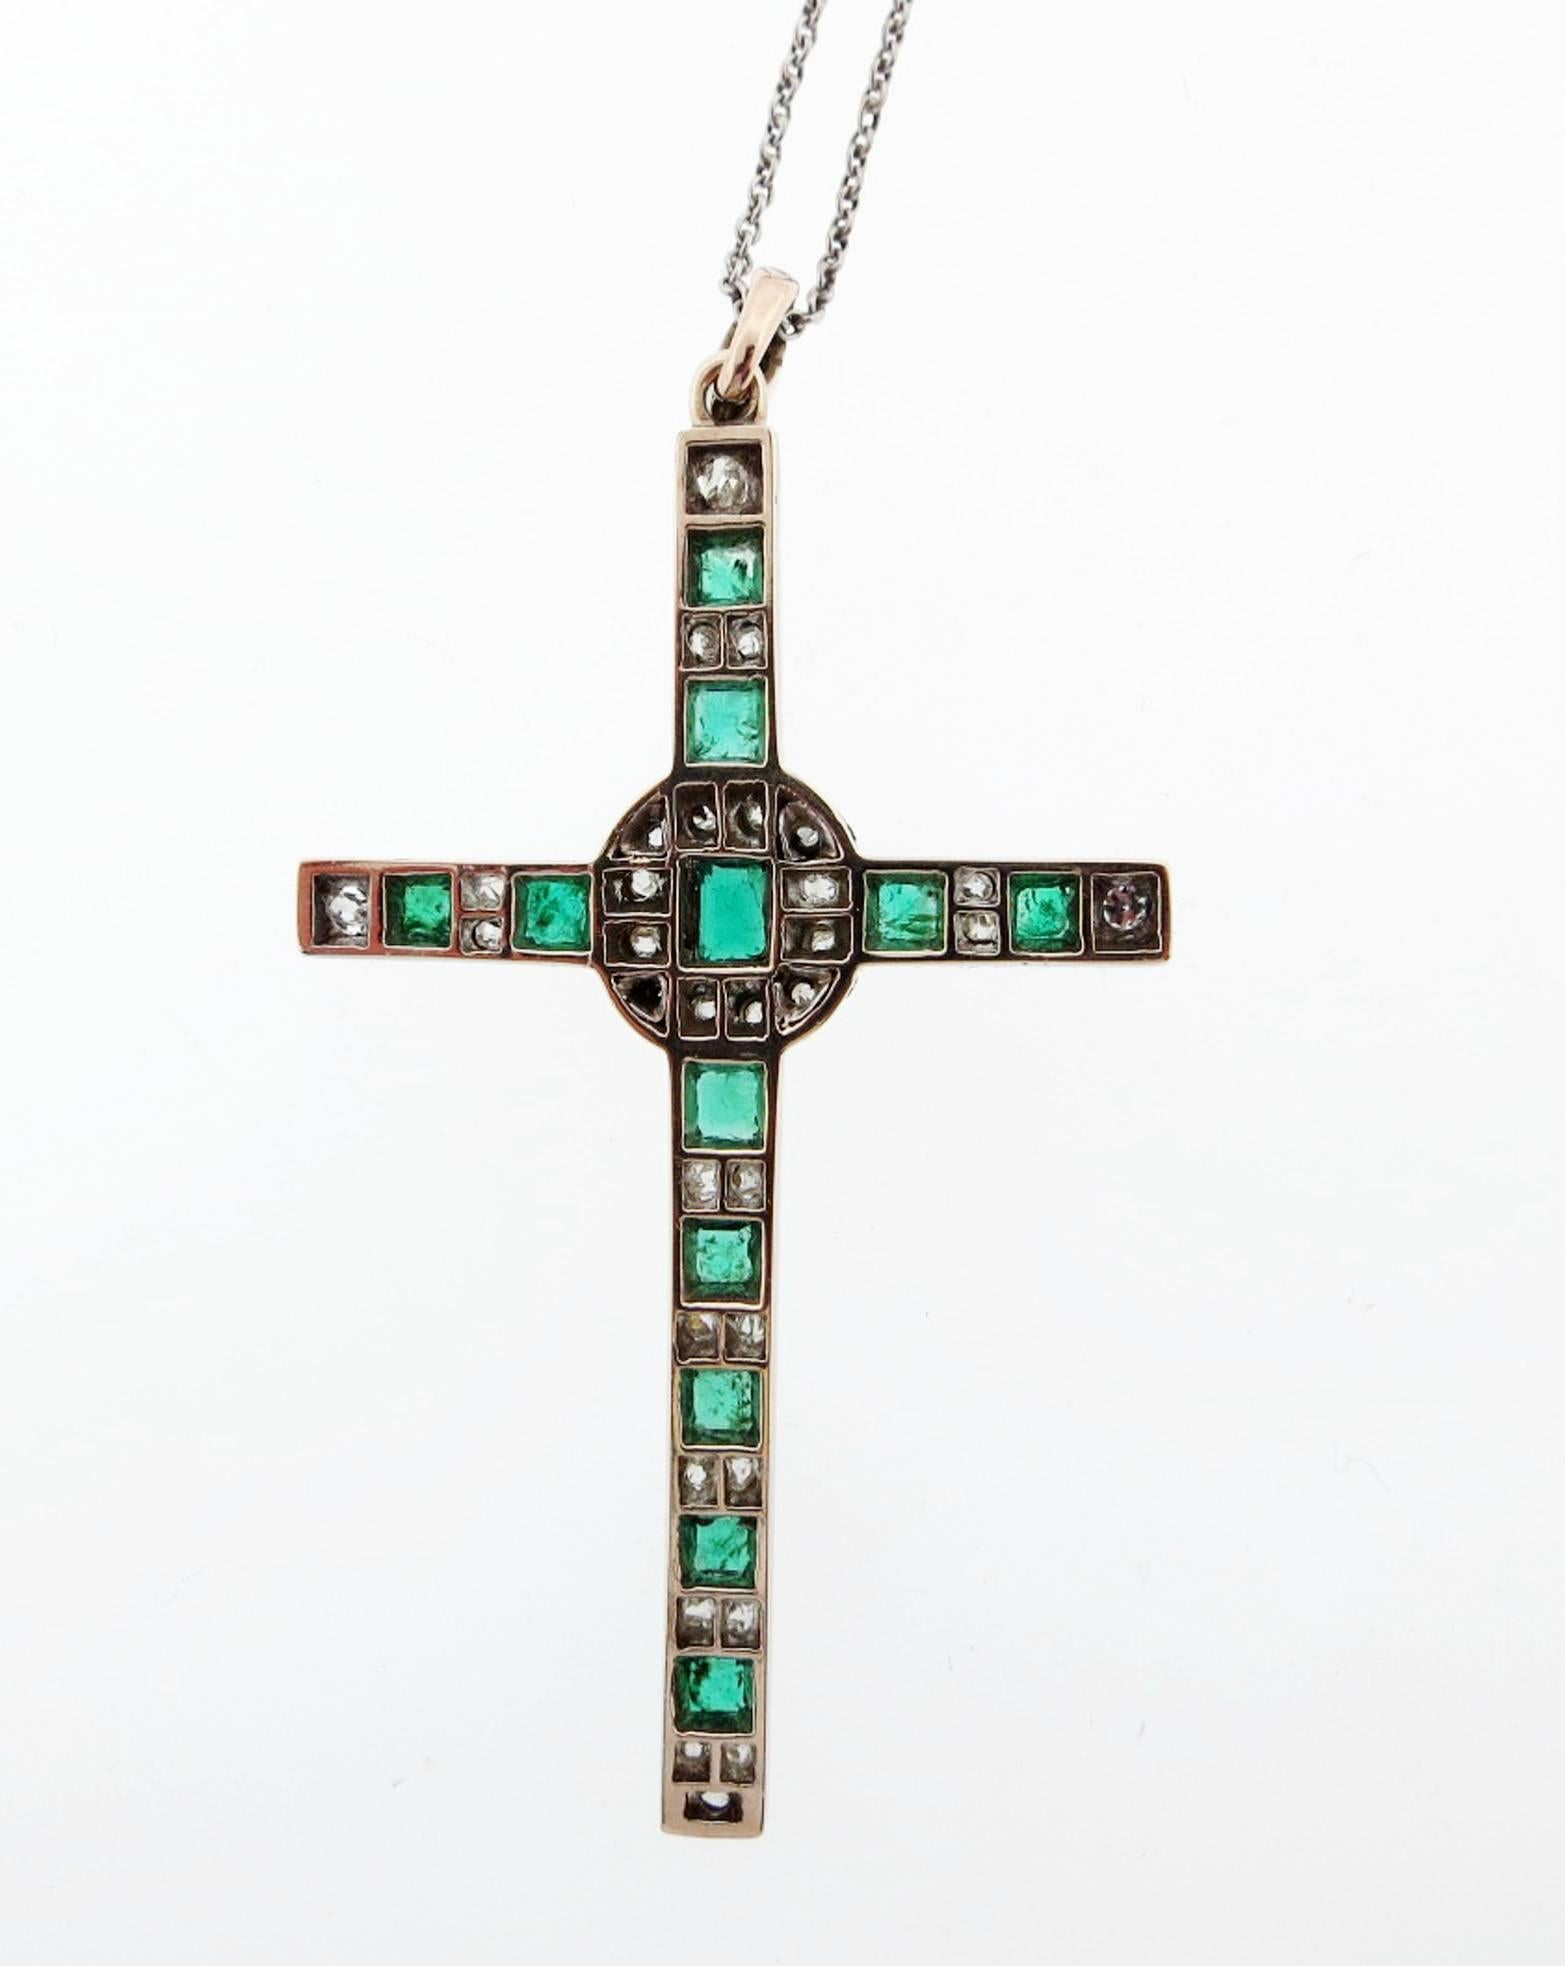 Edwardian platinum top and gold back emerald and diamond cross circa 1900. The cross measures 2.25 inches in length. Set with 12 faceted natural emeralds totaling approx  1.8cts. and 34 old cushion and mine cut diamonds totaling approx. 1.0cts. The